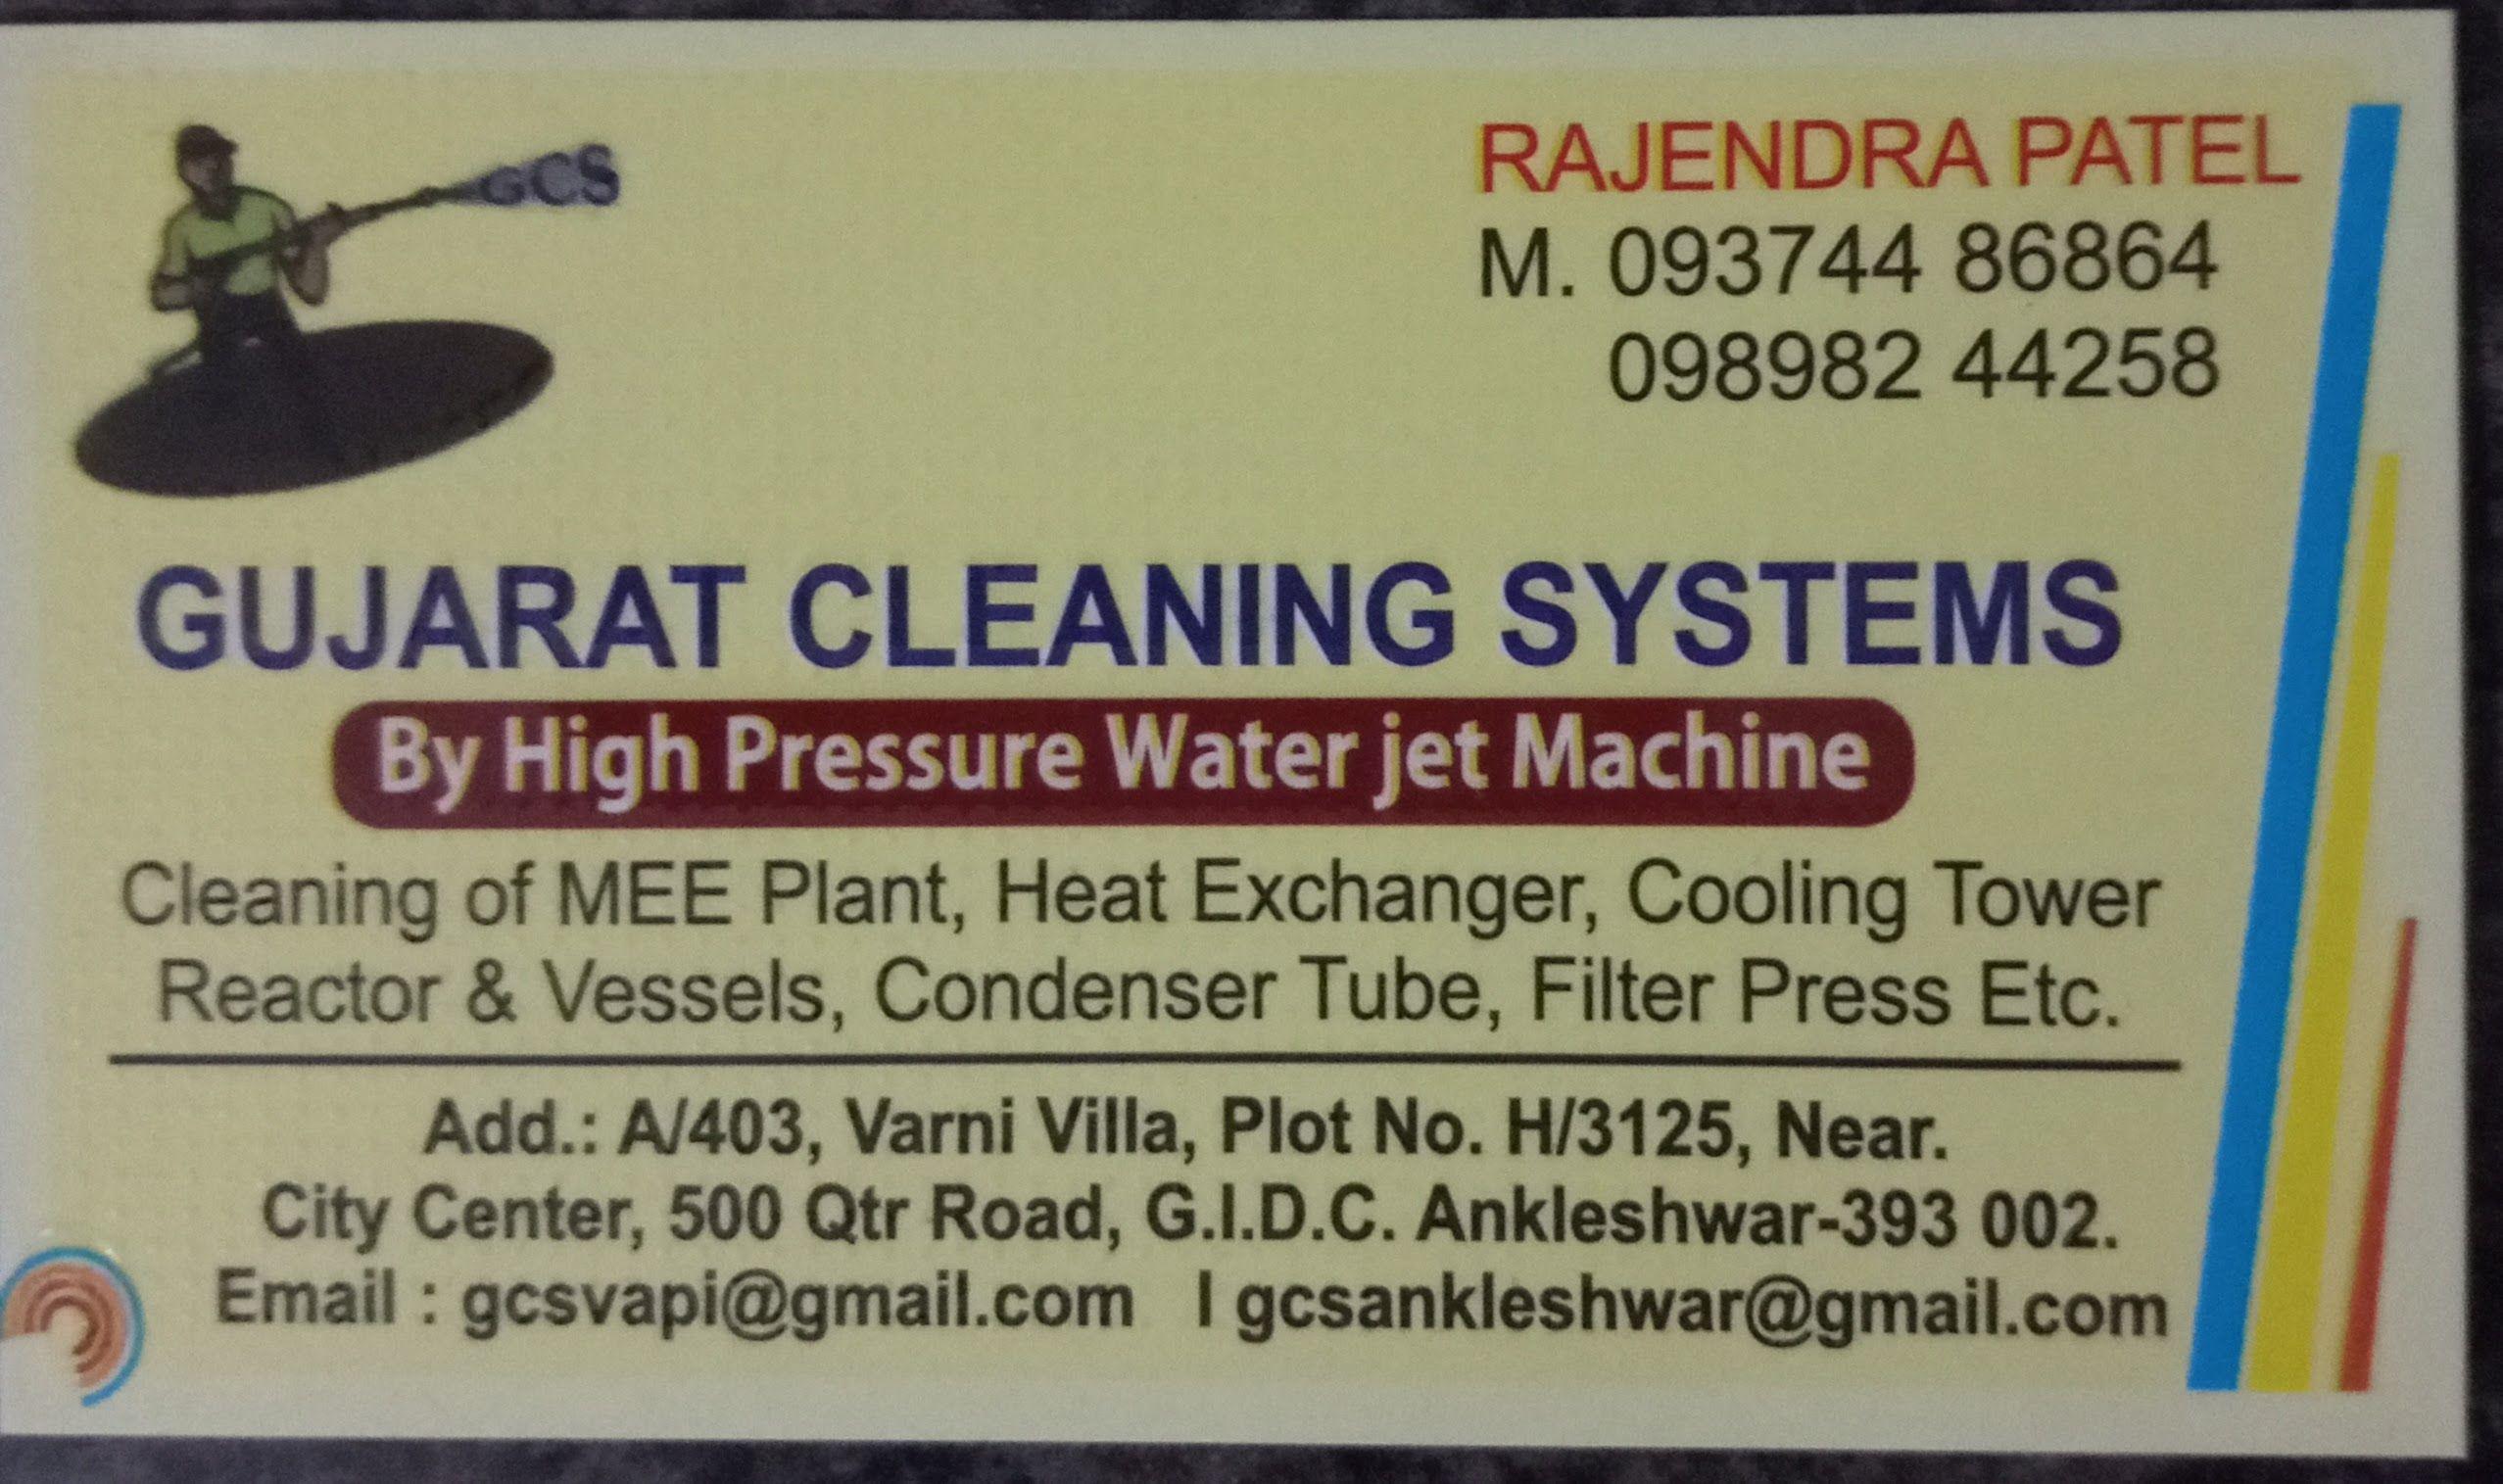 GUJARAT CLEANING SYSTEMS